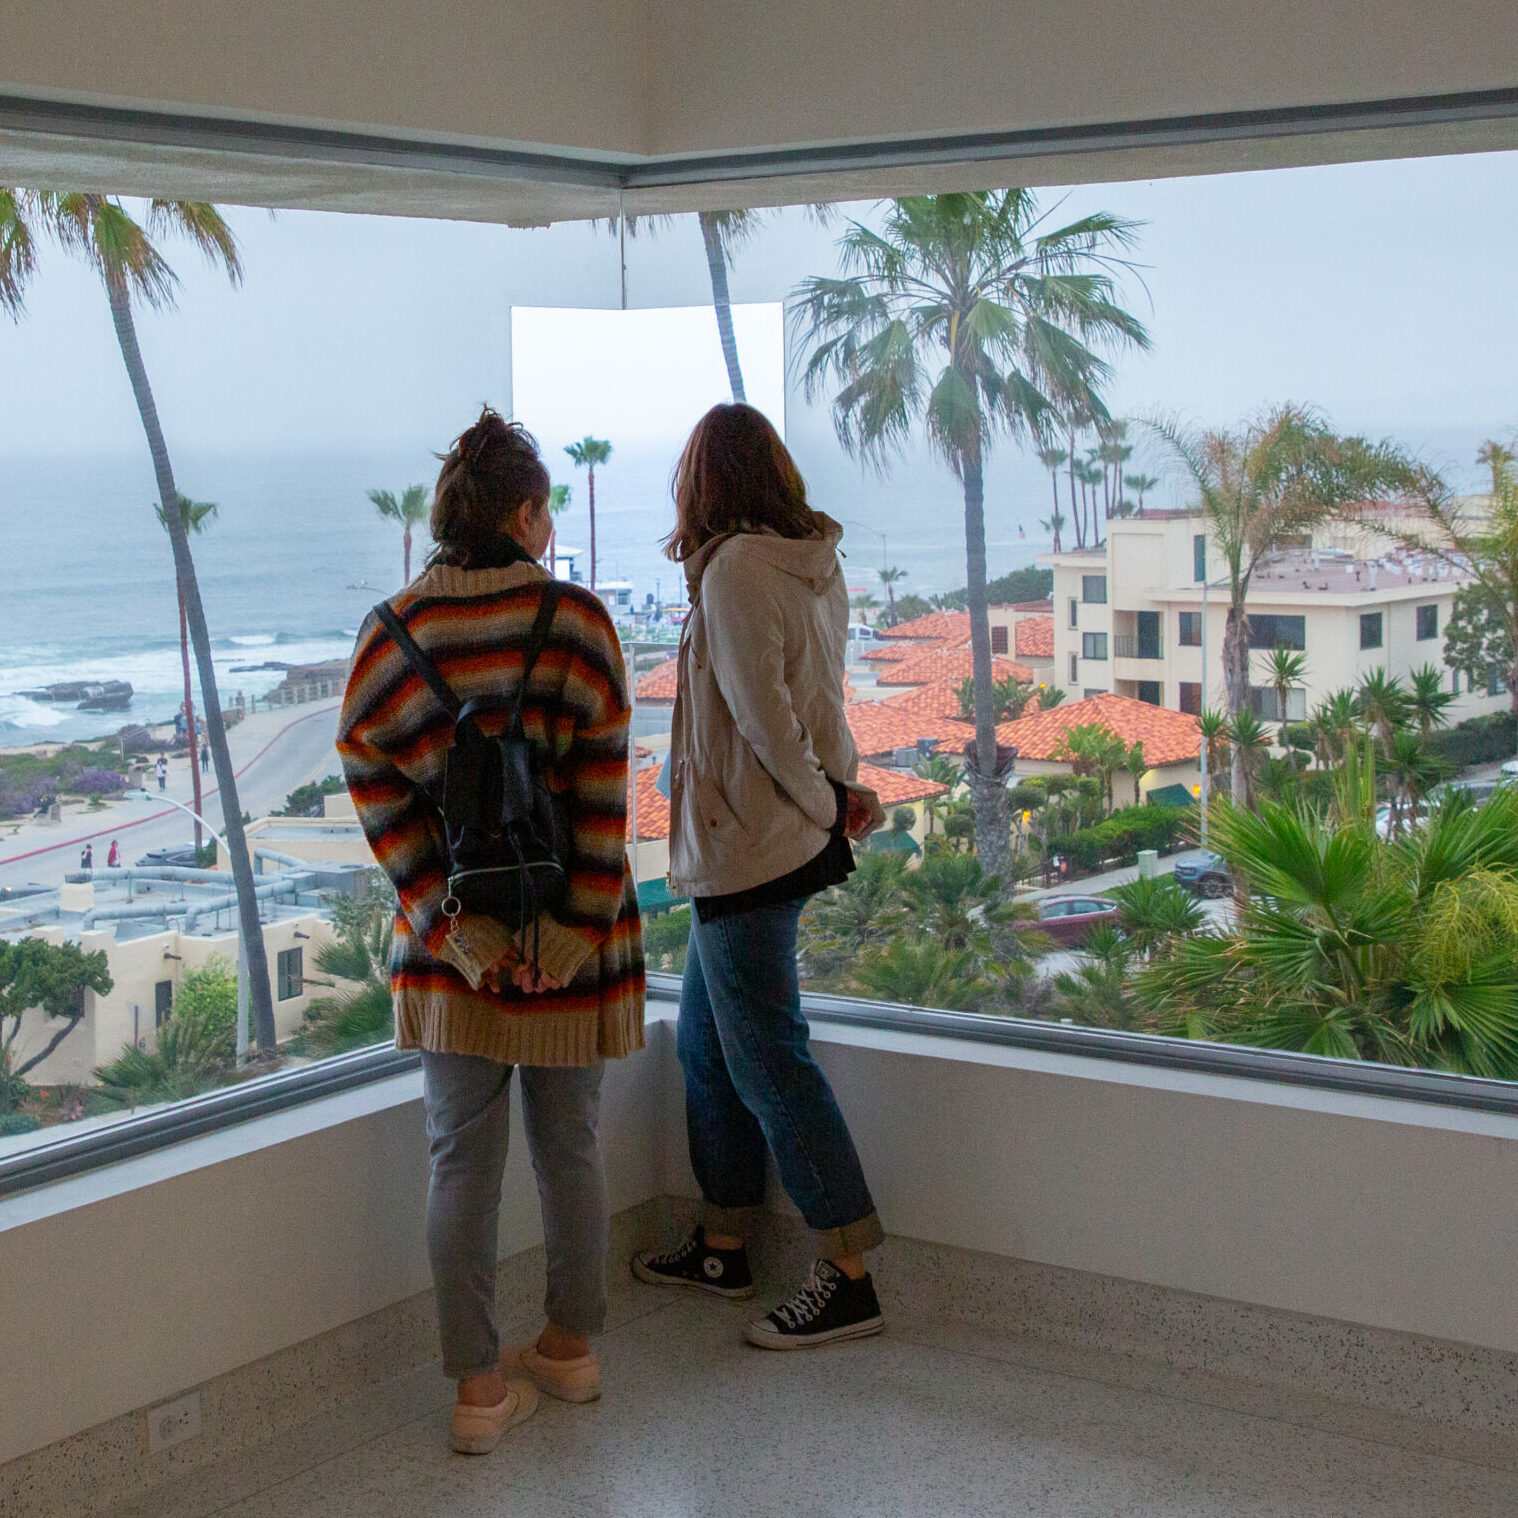 Two museum visitors standing and looking out a window that overlooks La Jolla and the Pacific Ocean.